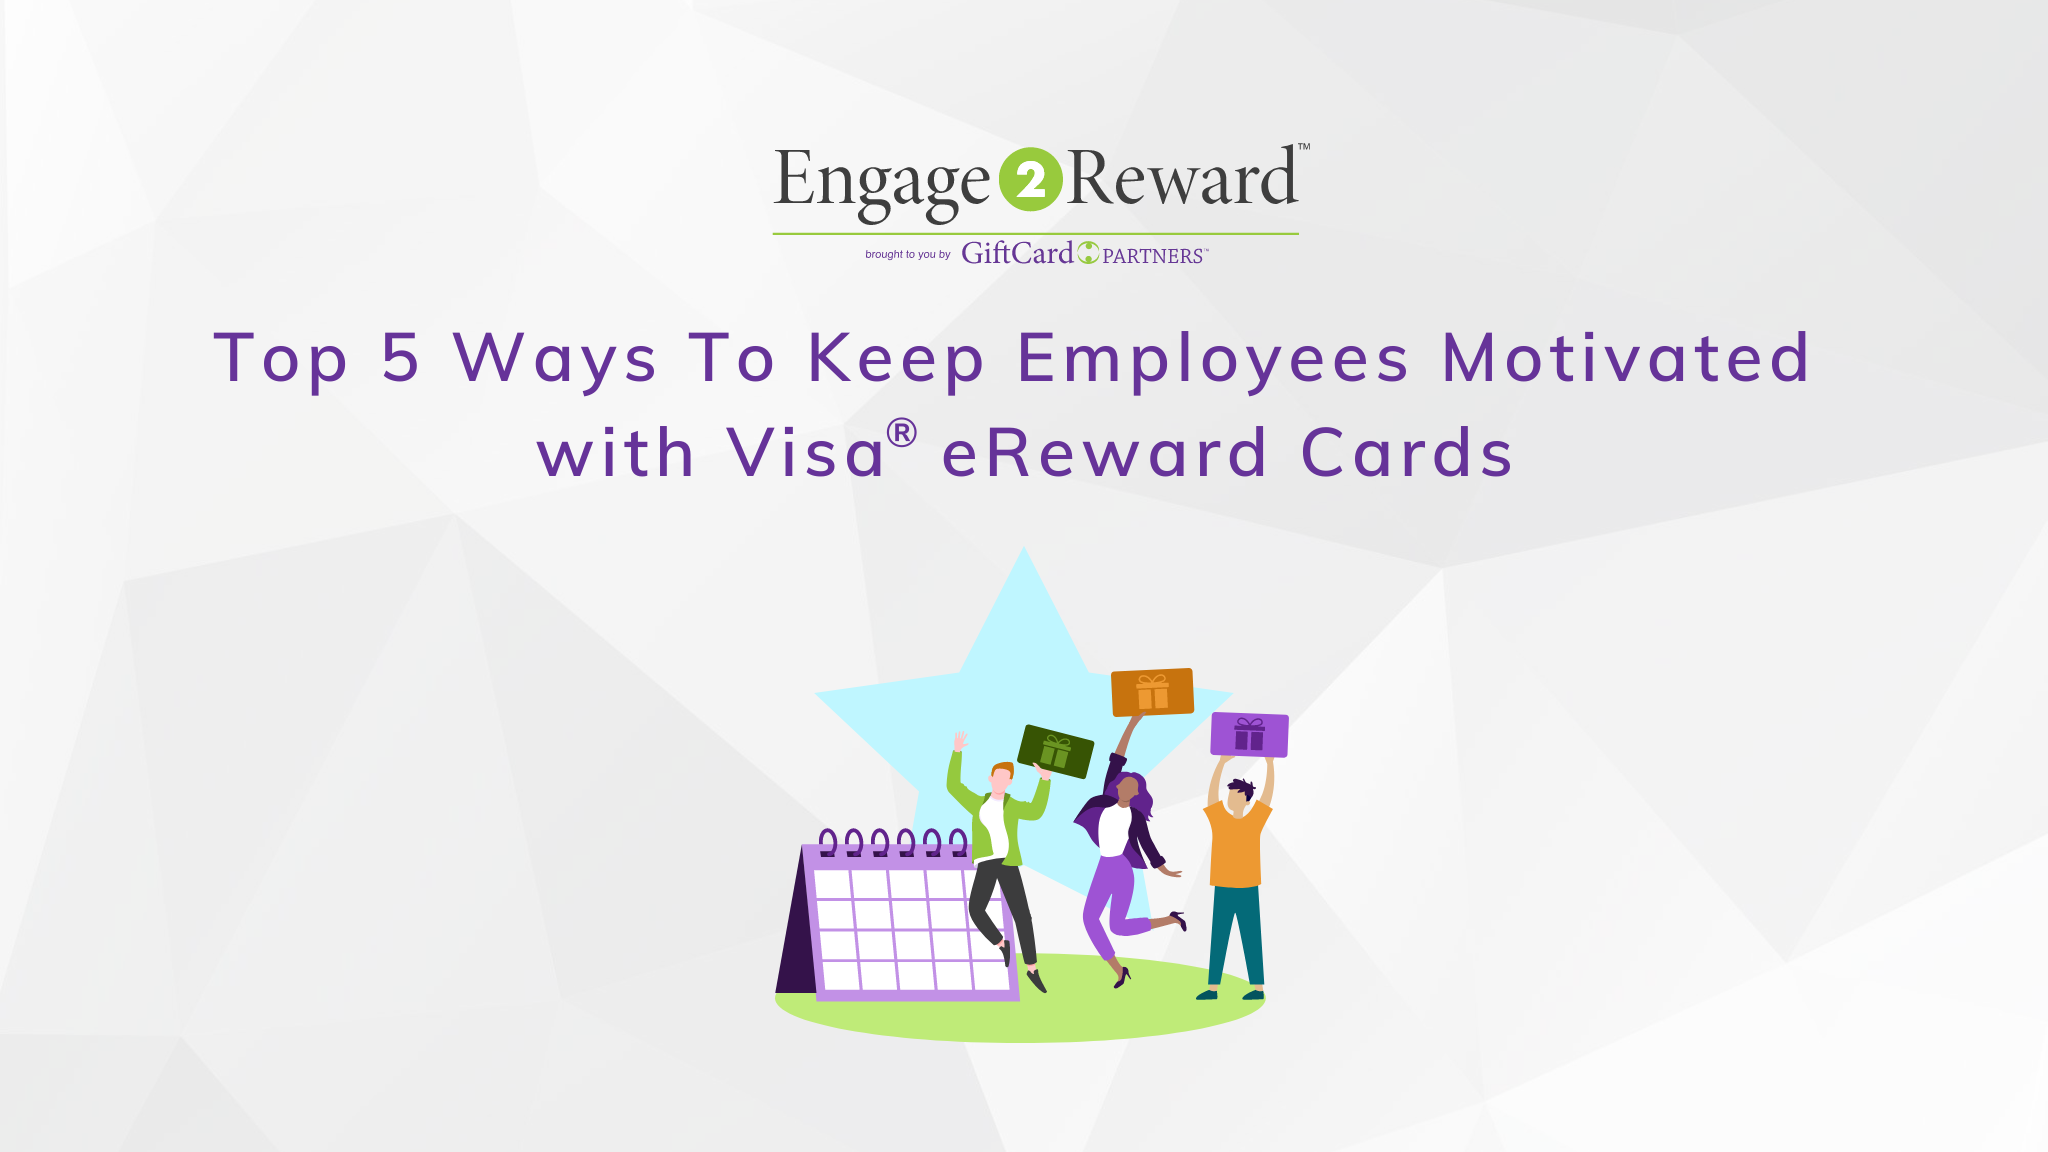 Top 5 Ways To Keep Employees Motivated with Visa® eReward Cards